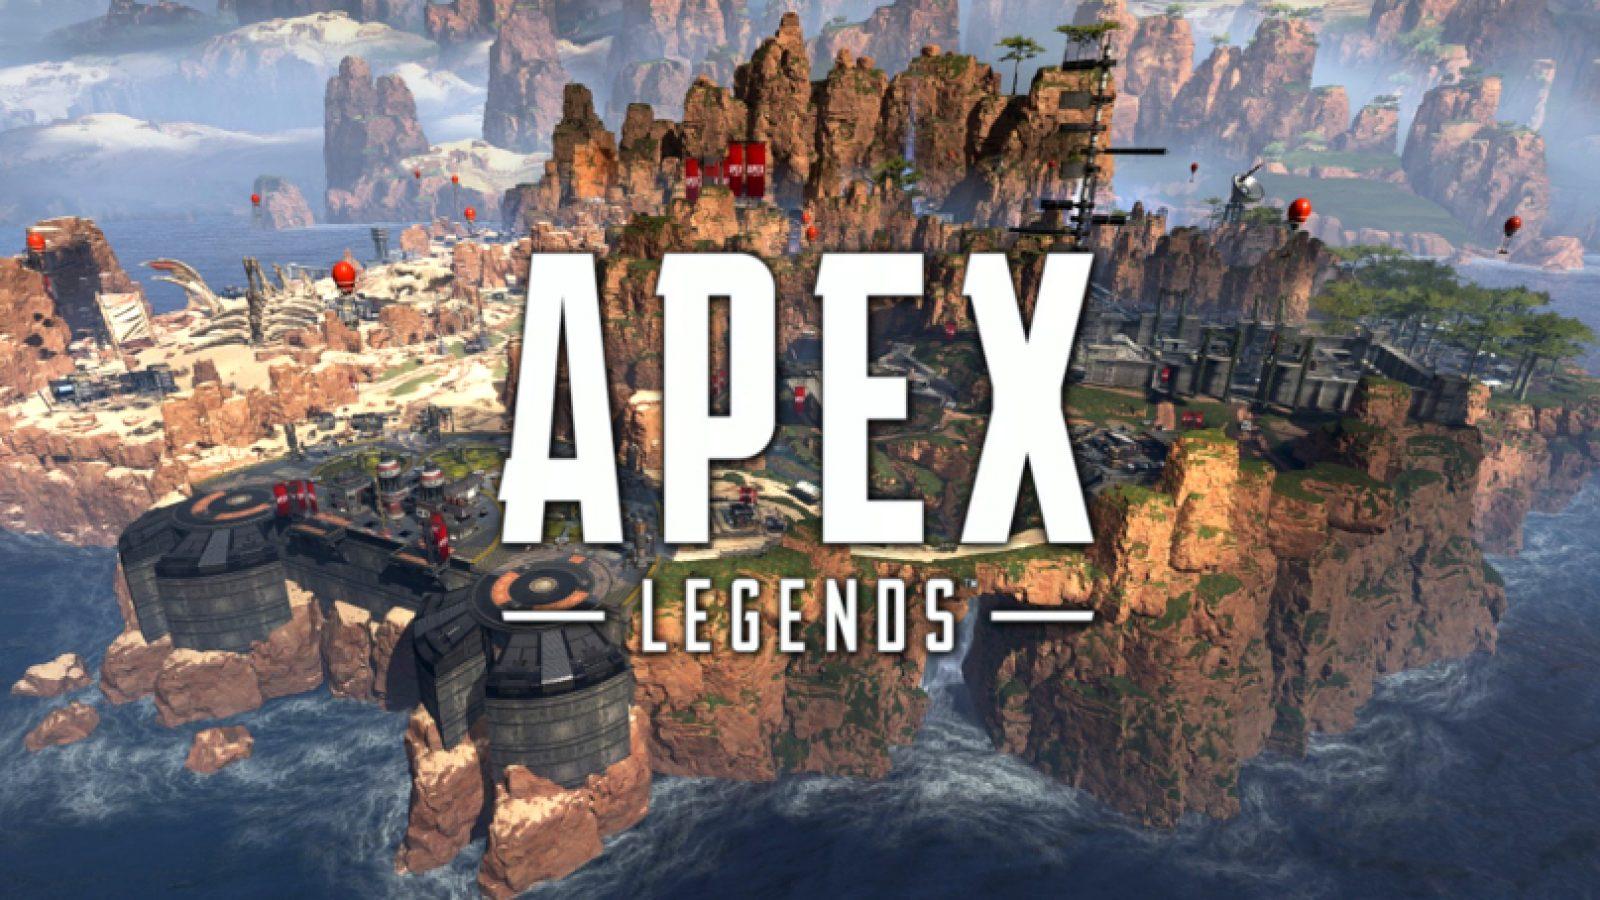 Check Out the Trailer to 'Apex Legends'